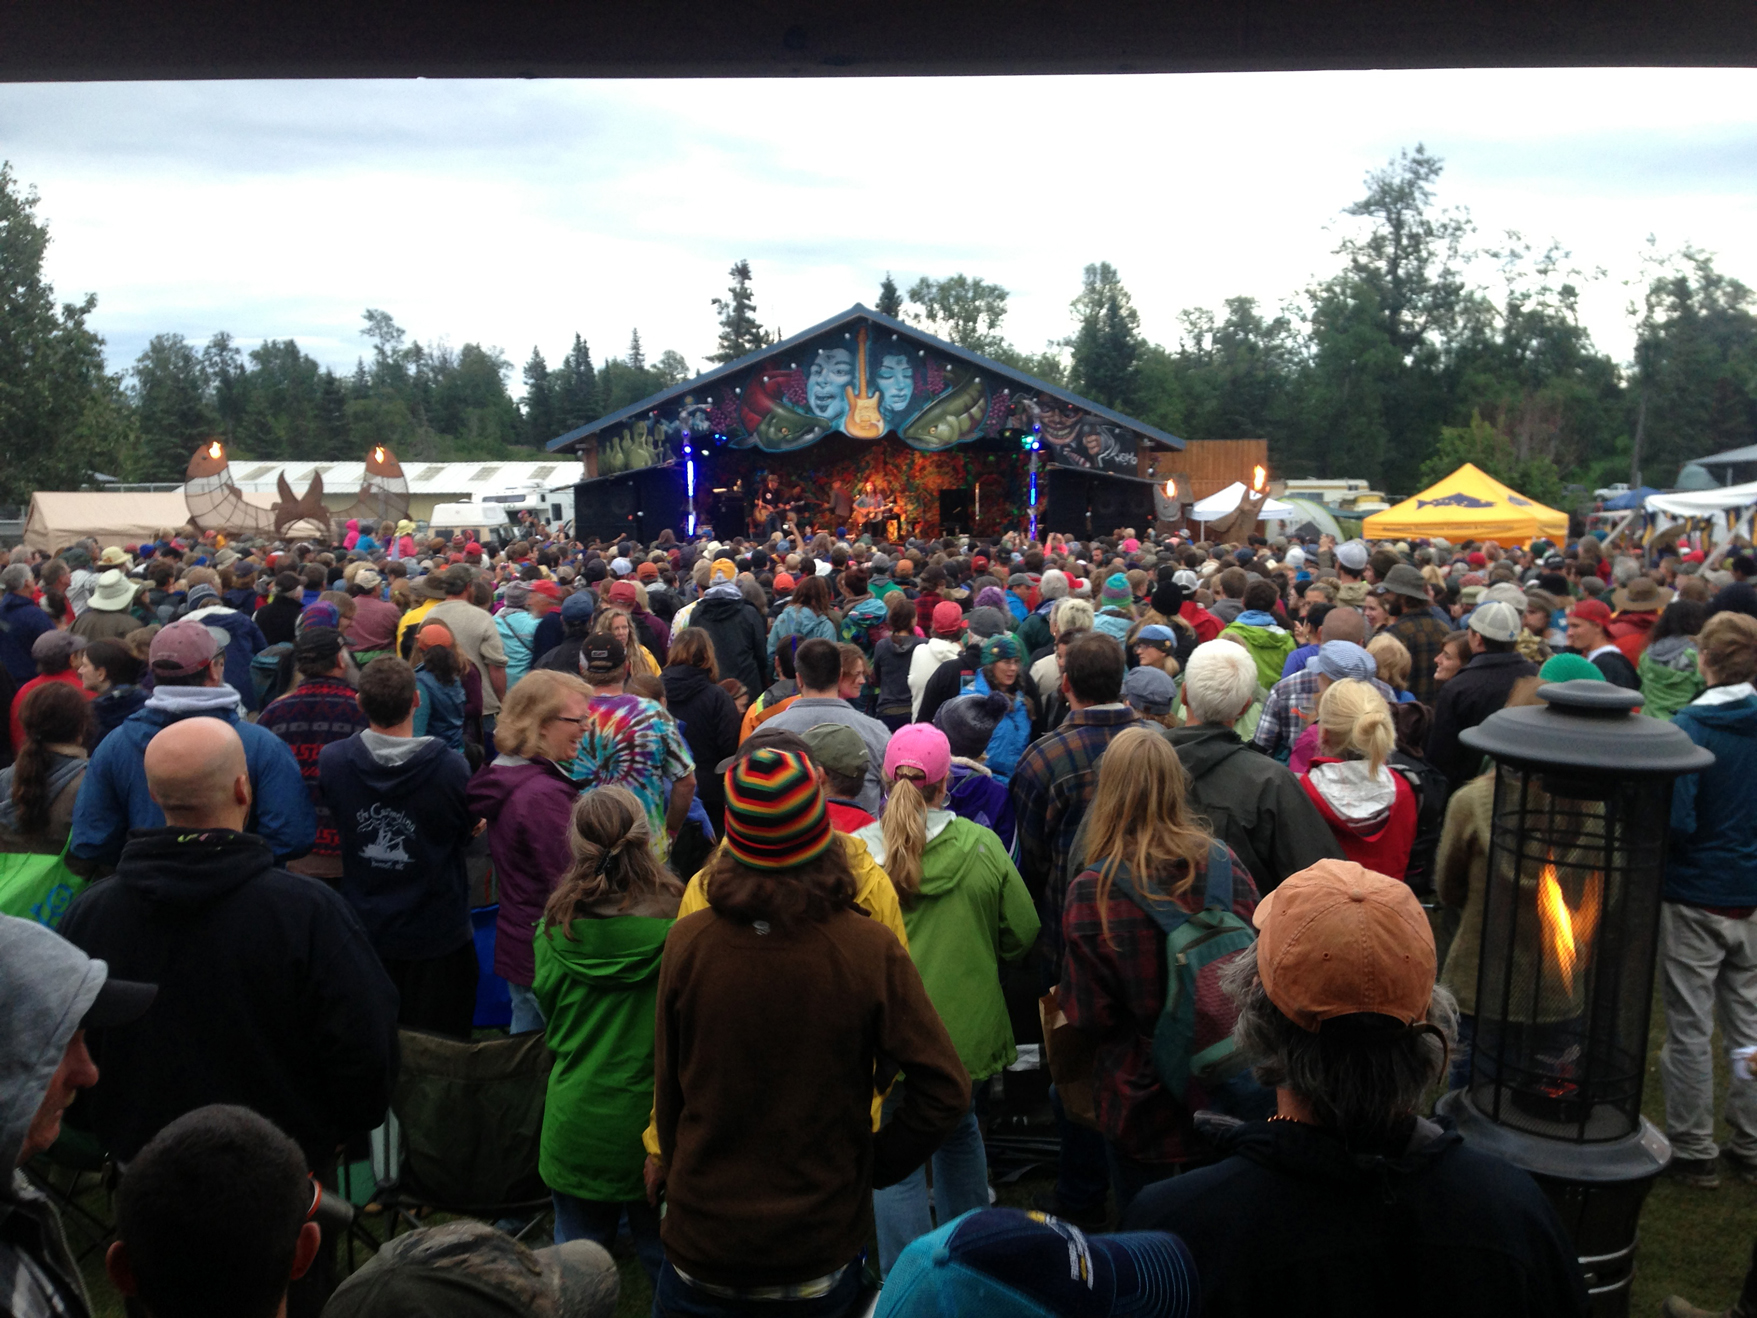 The Salmonstock crowd gathers before the main stage-Photo by Kate Huber, Renewable Resources Foundation